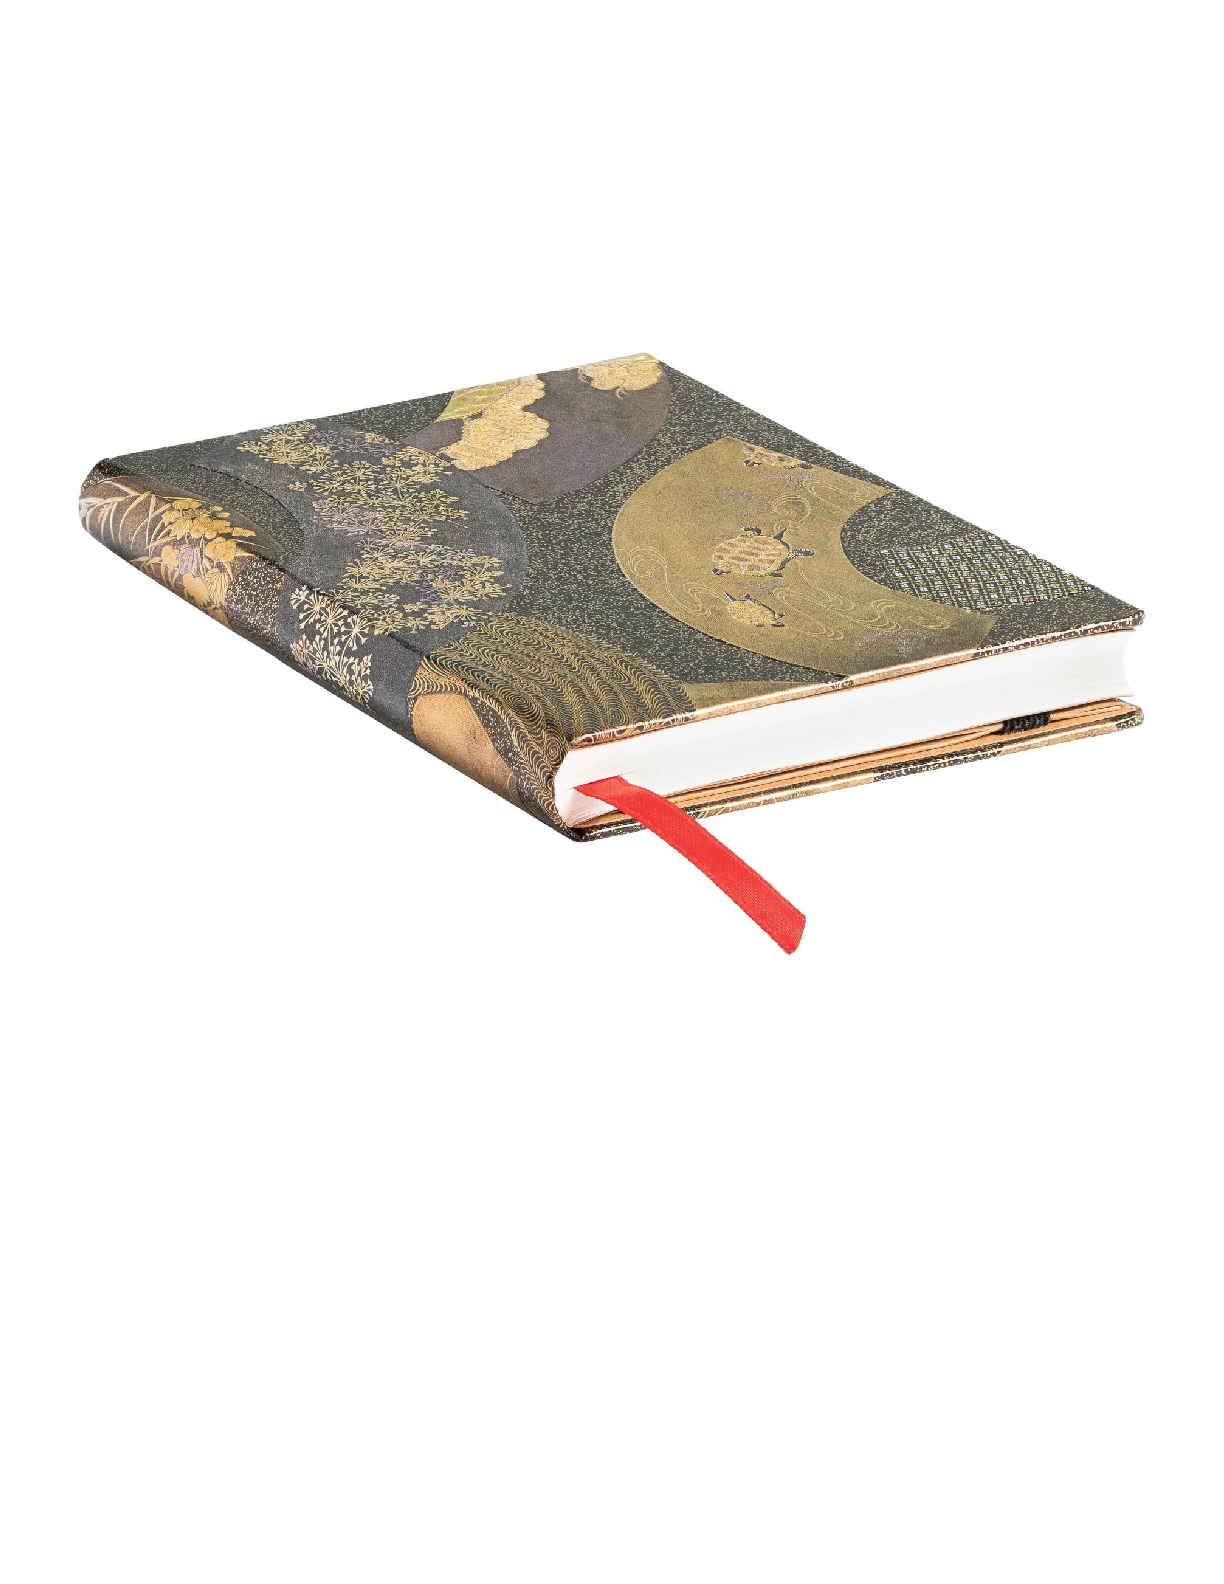 Ougi, Japanese Lacquer Boxes, Hardcover, Mini, Unlined, Elastic Band Closure, 176 Pg, 85 GSM